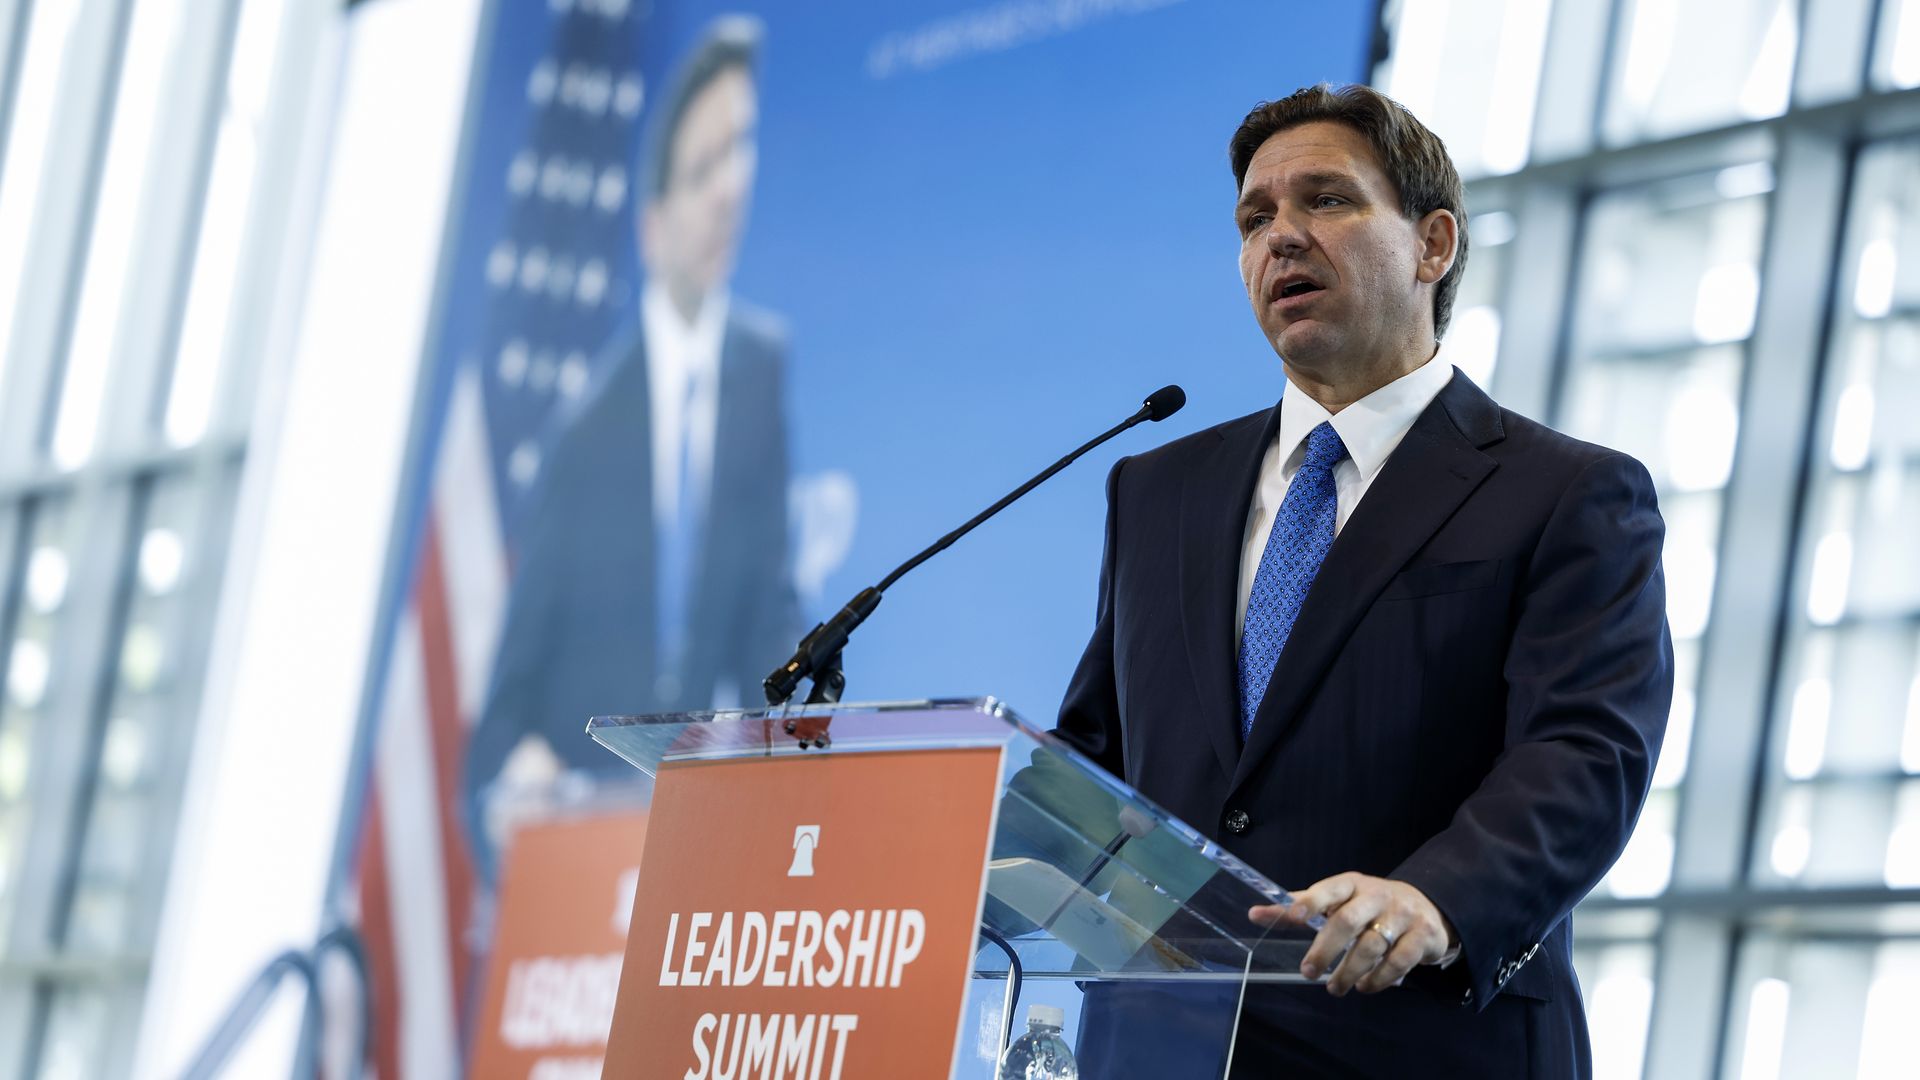 Ron DeSantis gives remarks at the Heritage Foundation's 50th Anniversary Leadership Summit at the Gaylord National Resort & Convention Center.